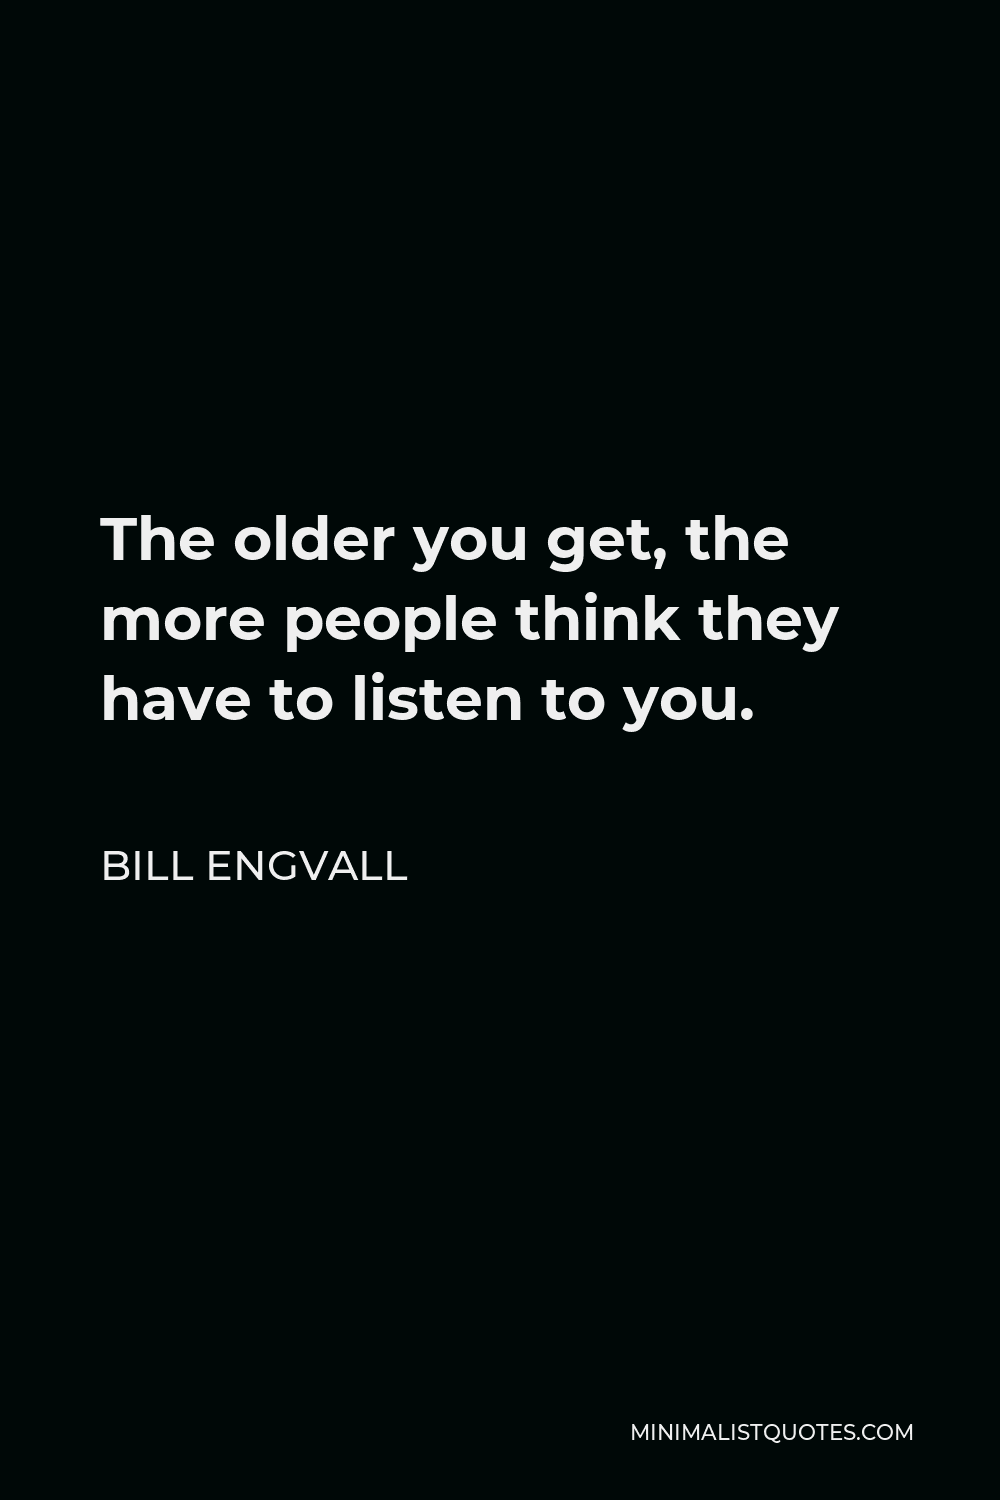 Bill Engvall Quote - The older you get, the more people think they have to listen to you.